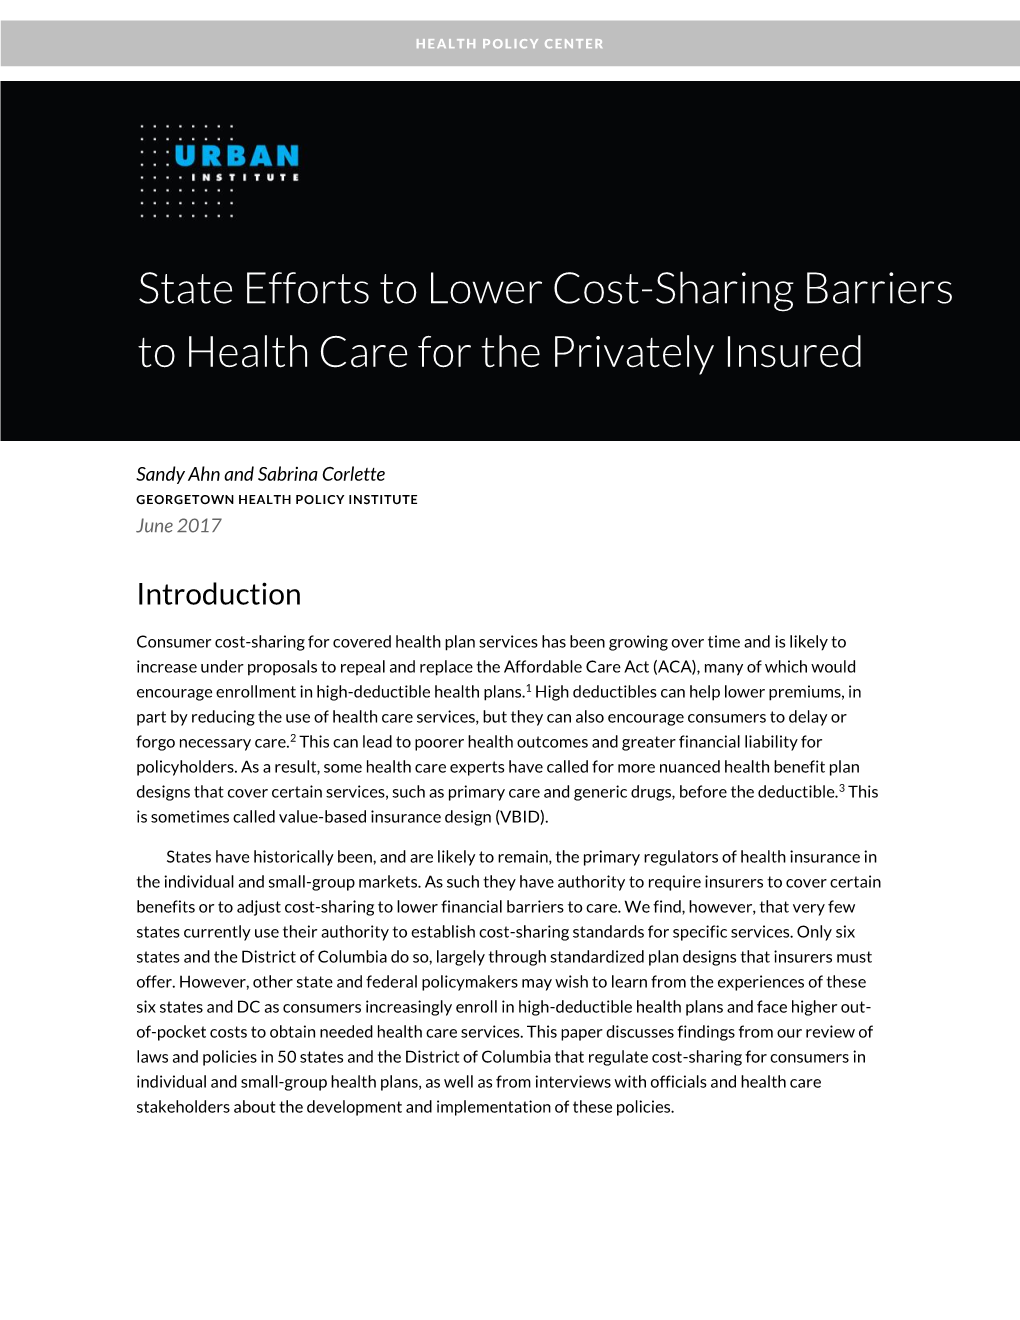 State Efforts to Lower Cost-Sharing Barriers to Health Care for the Privately Insured